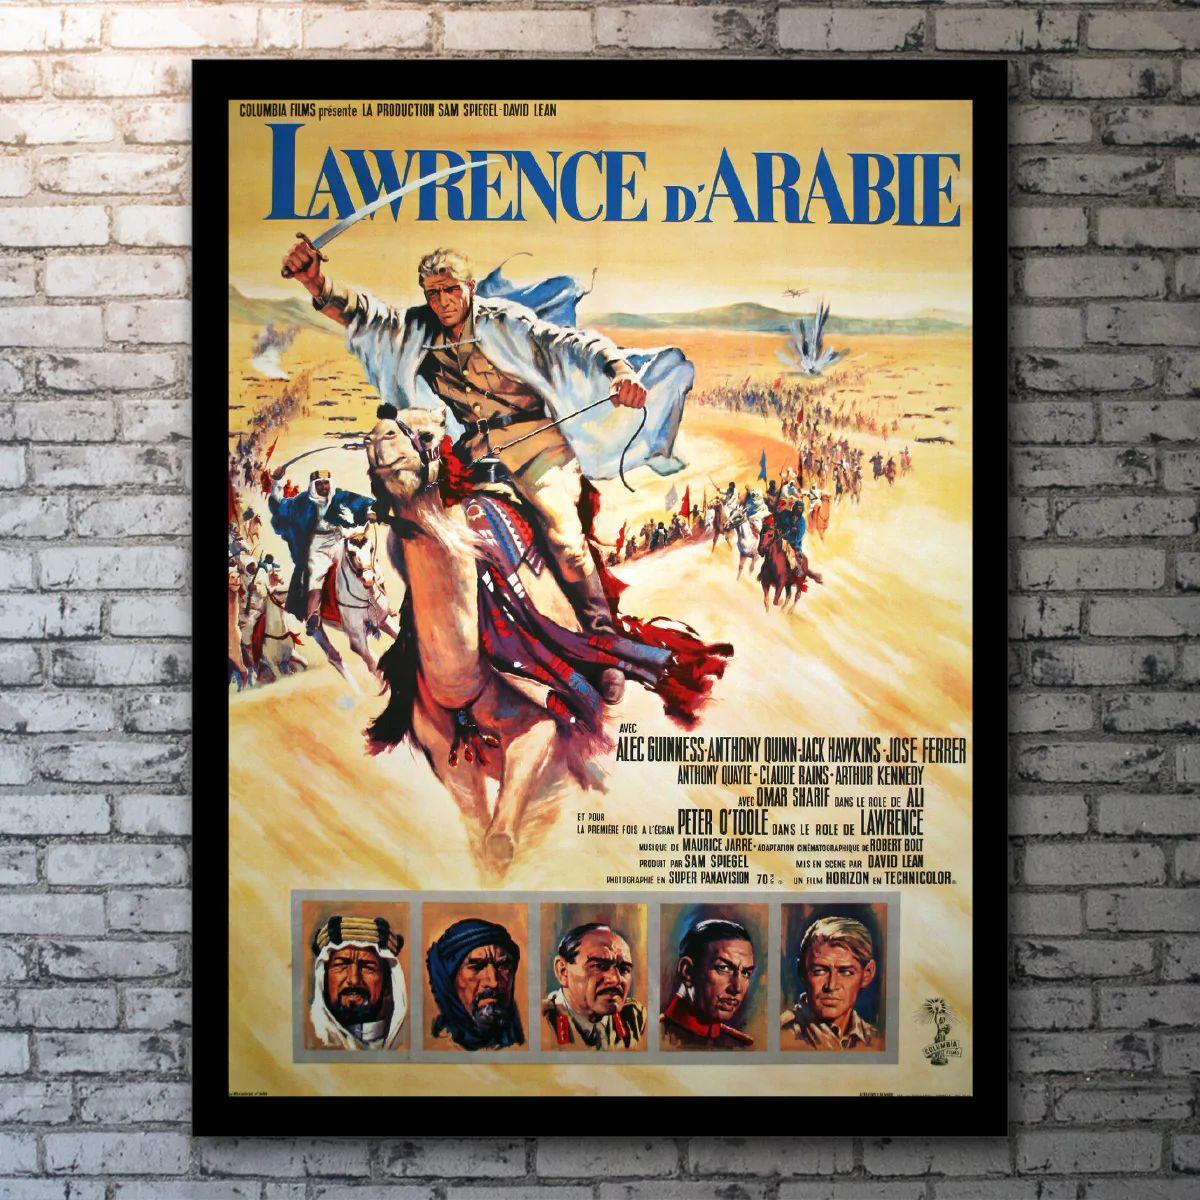 Lawrence of Arabia, Unframed Poster, 1962

Original French Grande (47 x 63 inches). The story of T.E. Lawrence, the English officer who successfully united and led the diverse, often warring, Arab tribes during World War I in order to fight the